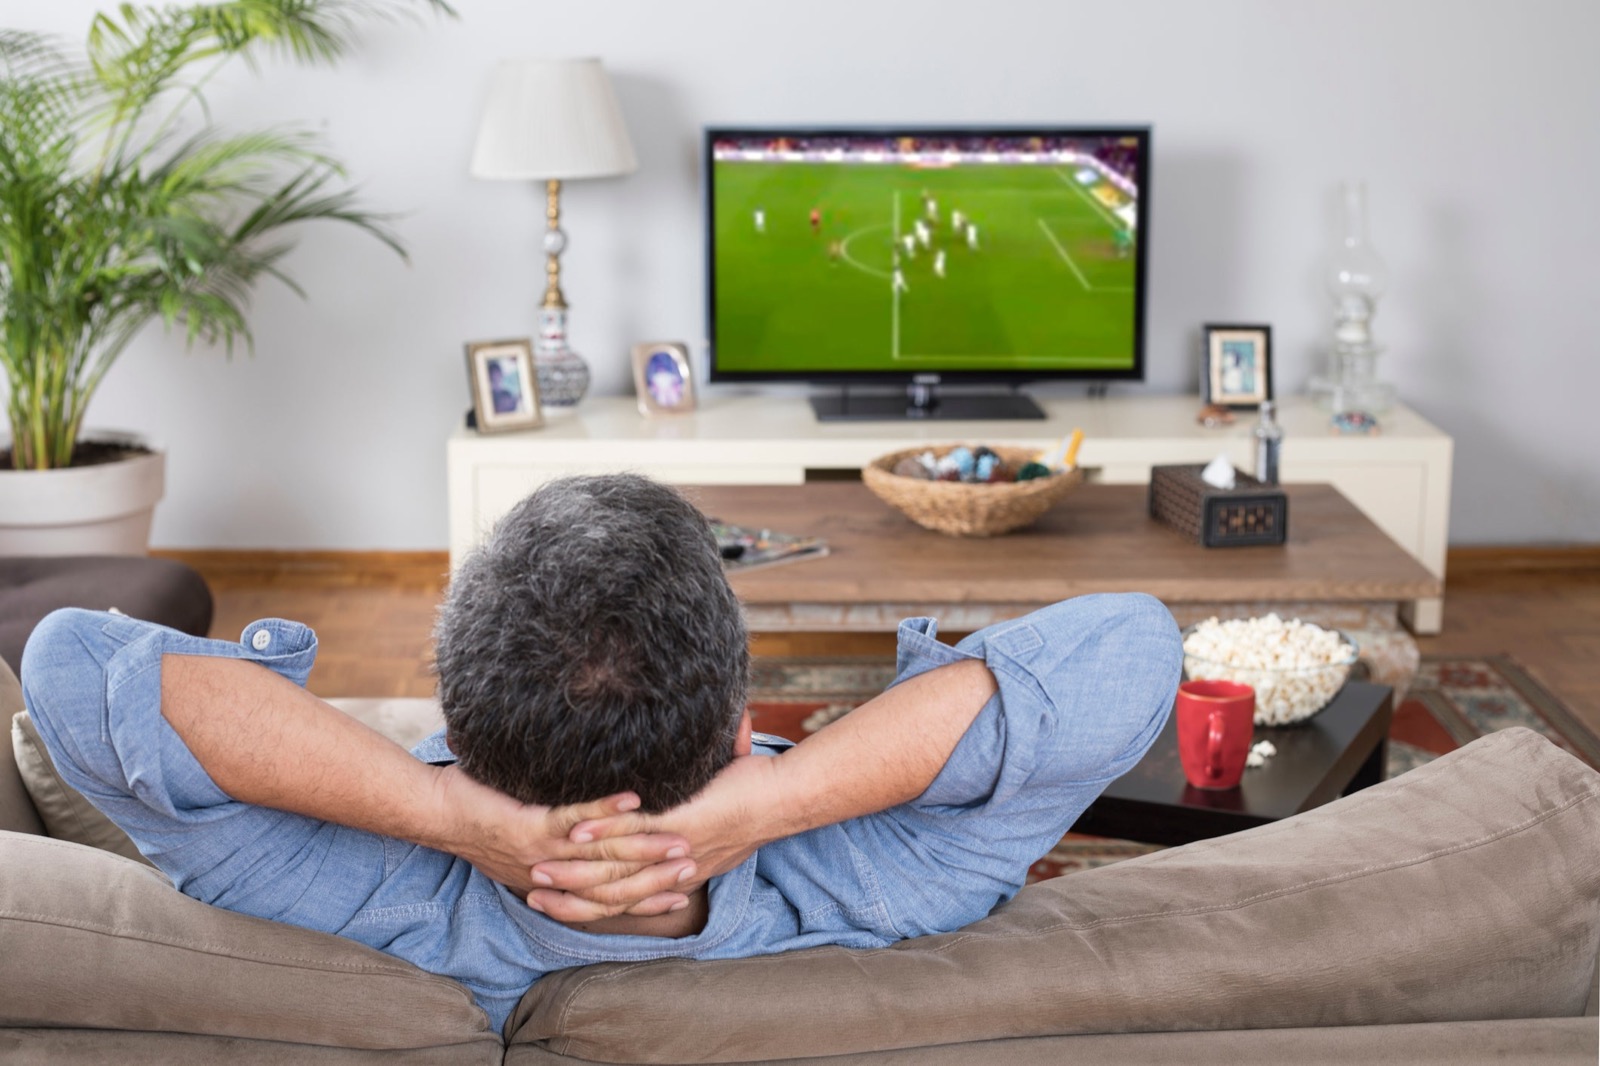 Rate These 15 Images and We Will Tell You What Your Future Looks Like Watching Sports Soccer Football Game On Tv